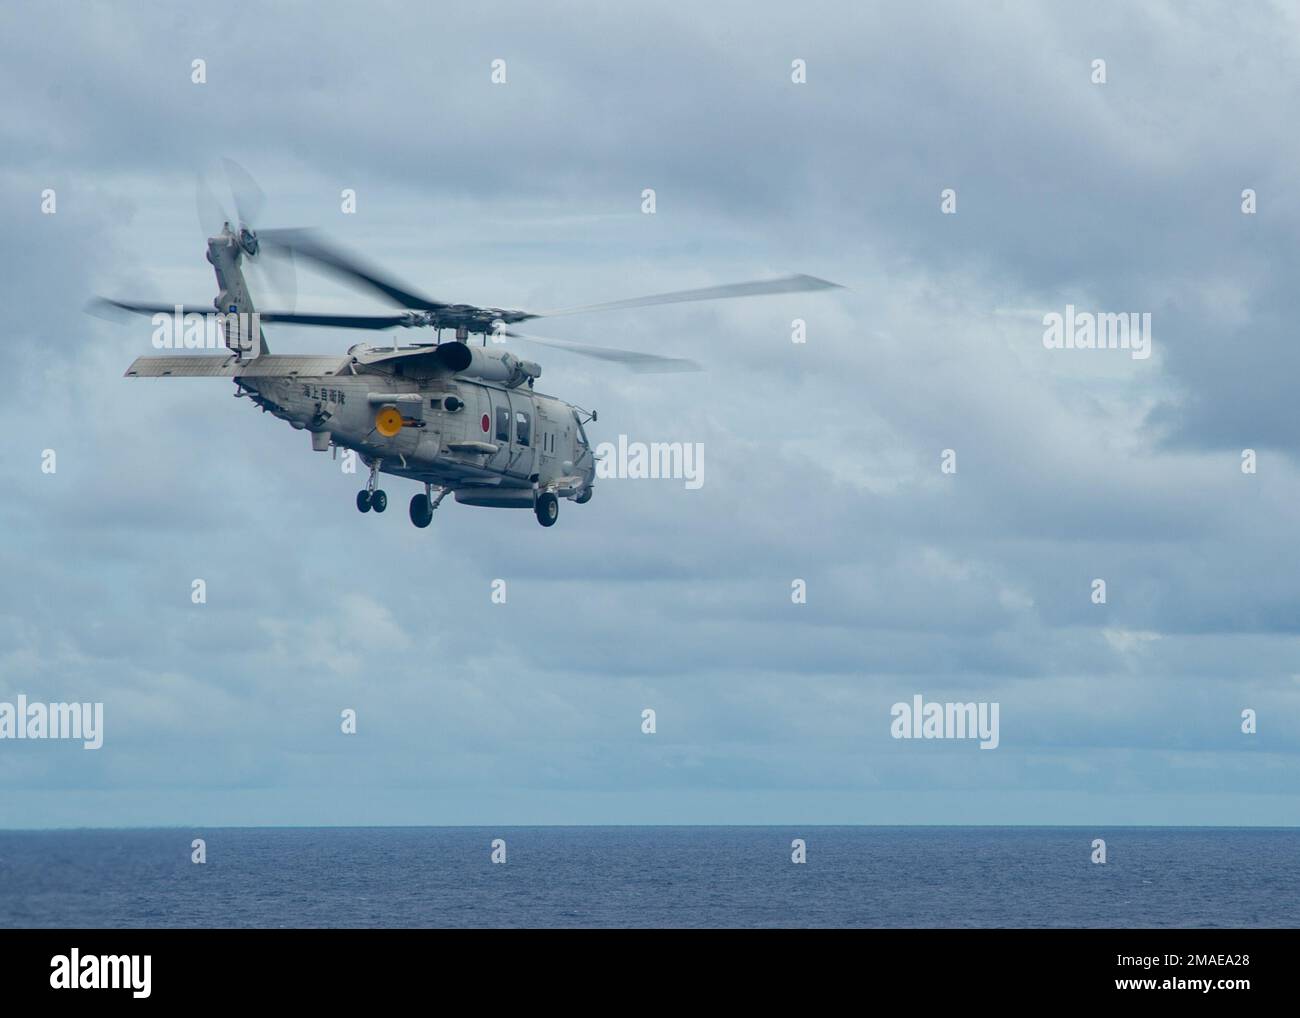 220526-N-YQ181-2046 PHILIPPINE SEA (May 26, 2022) A Japan Maritime Self-Defense Force (JMSDF) SH-60K Sea Hawk helicopter attached to the JMSDF destroyer JS Teruzuki (DDG 116) departs from the flight deck of U.S. Navy’s only forward-deployed aircraft carrier USS Ronald Reagan (CVN 76). The U.S. Navy and JMSDF have worked together as maritime partners for more than 60 years supporting the U.S.-Japan alliance. Ronald Reagan, the flagship of Carrier Strike Group 5, provides a combat-ready force that protects and defends the United States, and supports alliances, partnerships and collective maritim Stock Photo